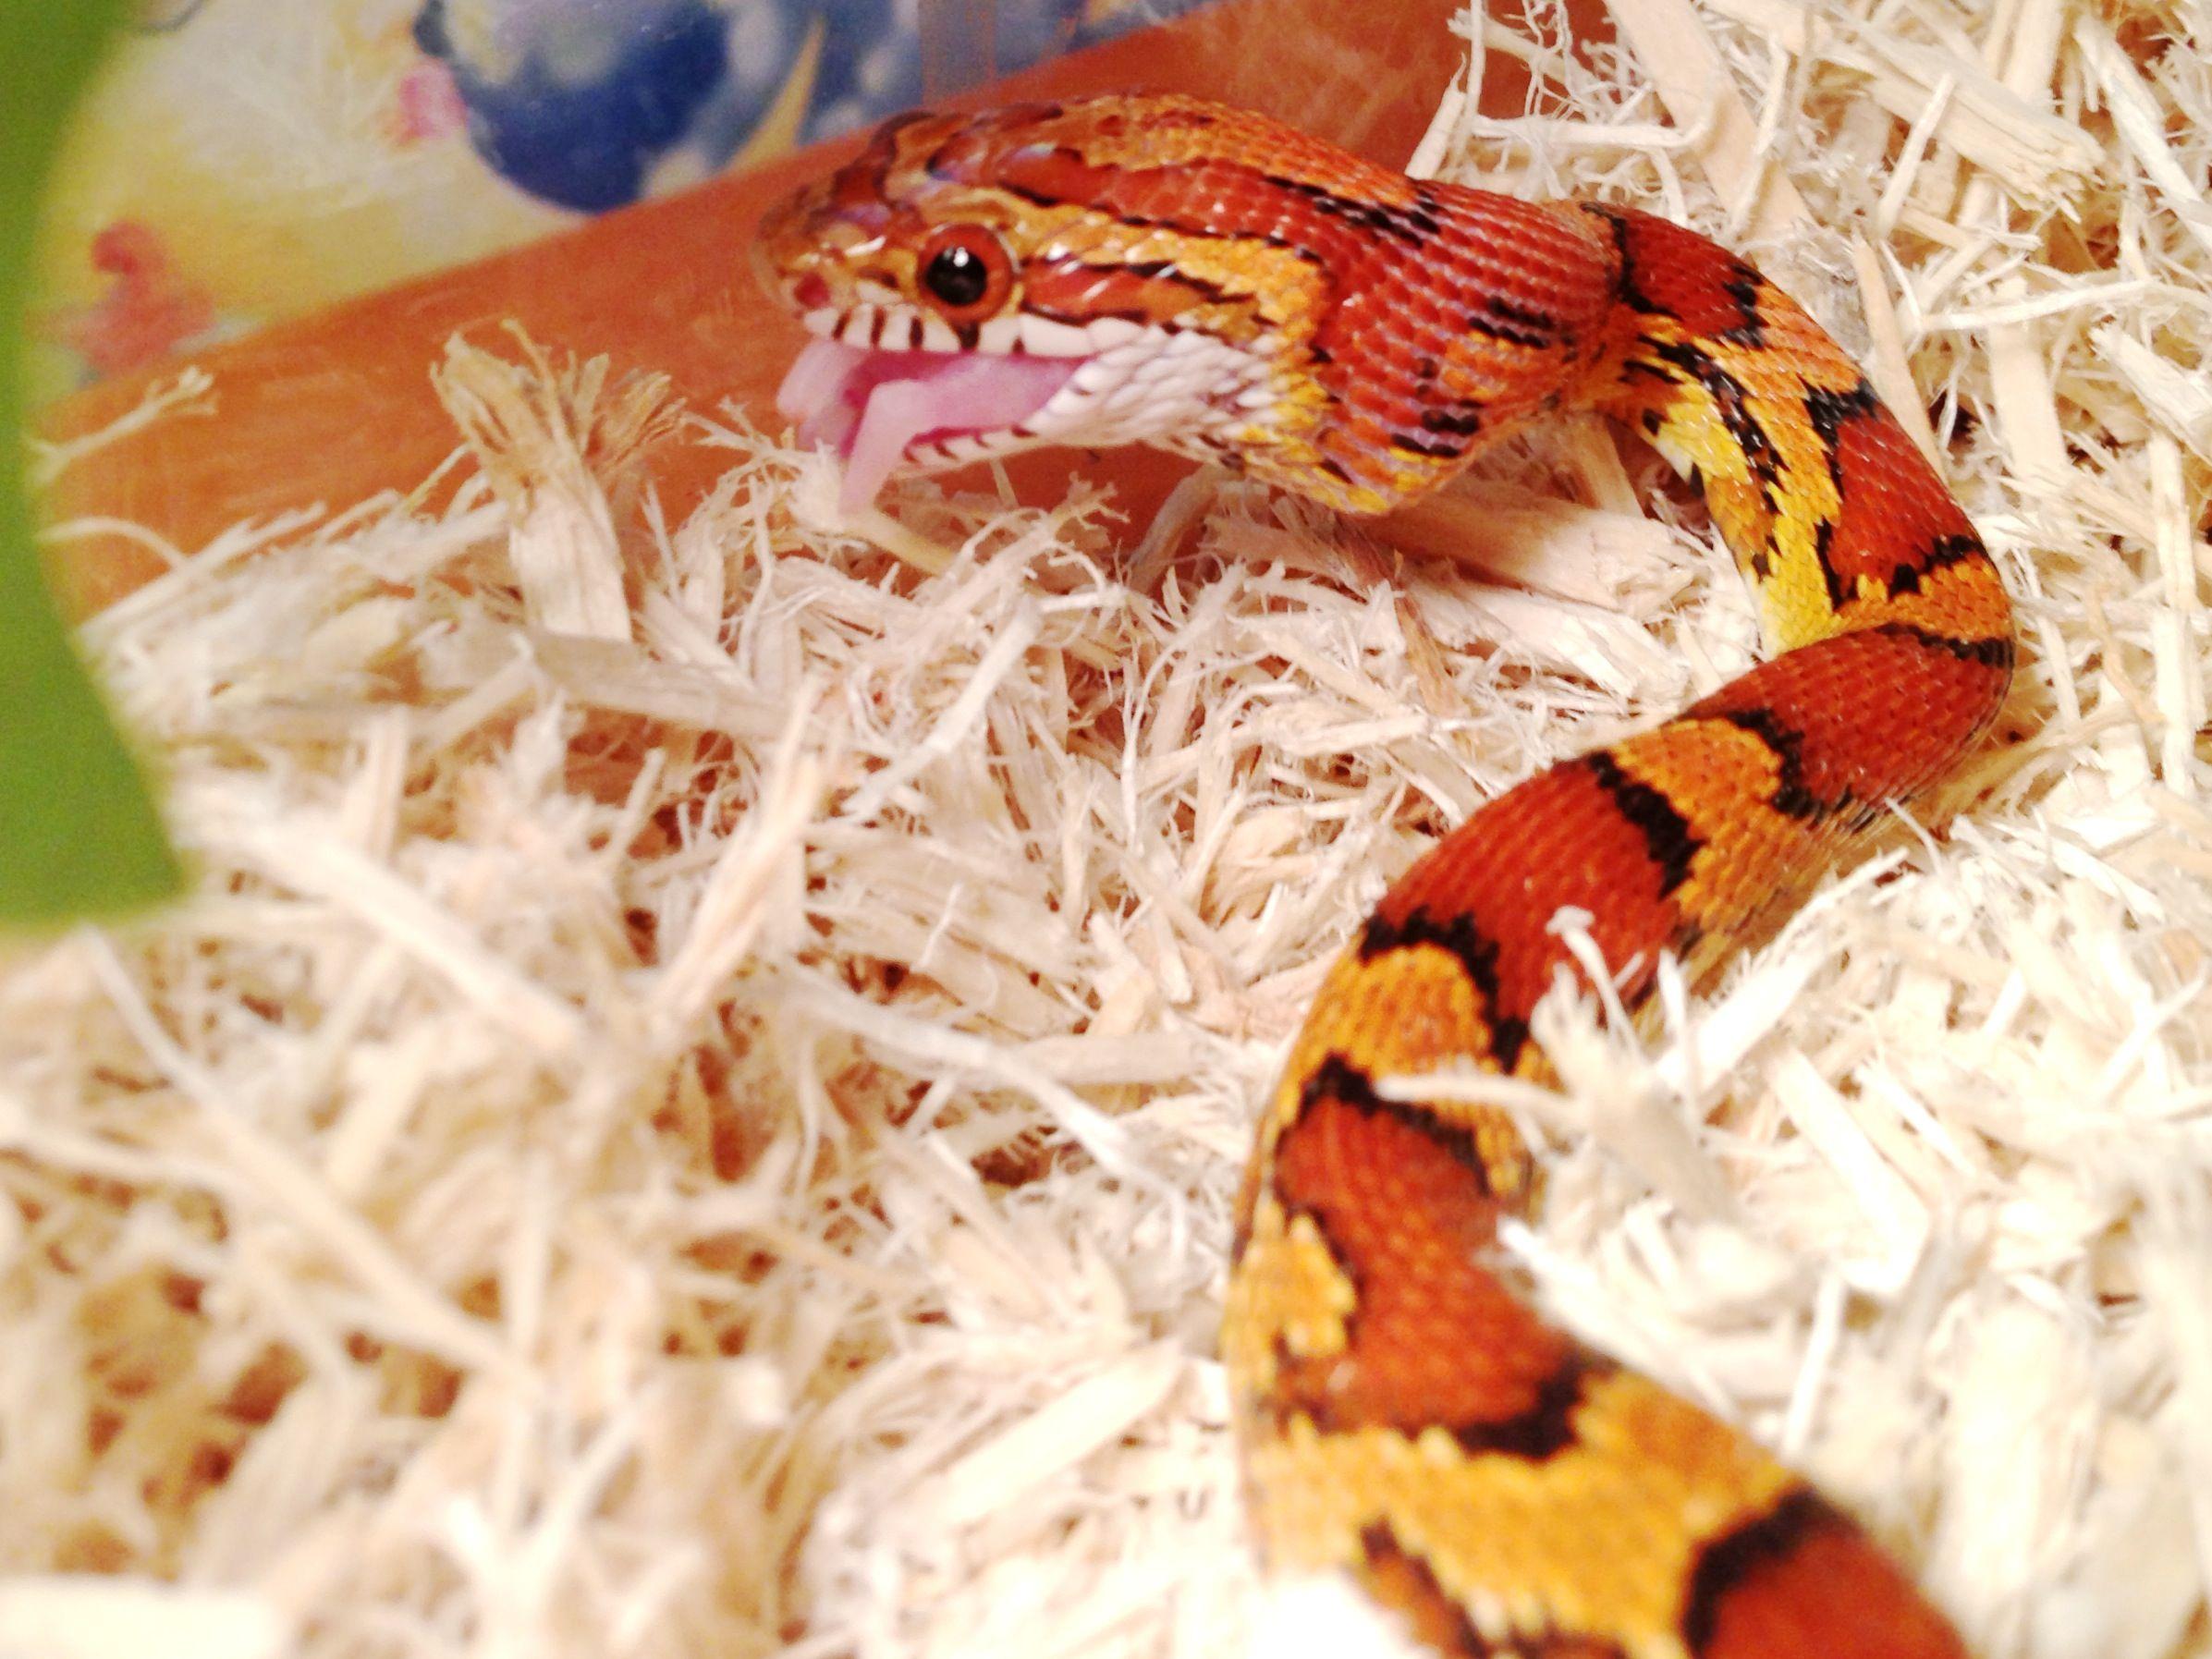 Yellow and Red Snake Logo - File:Corn snake eating baby mouse.jpg - Wikimedia Commons